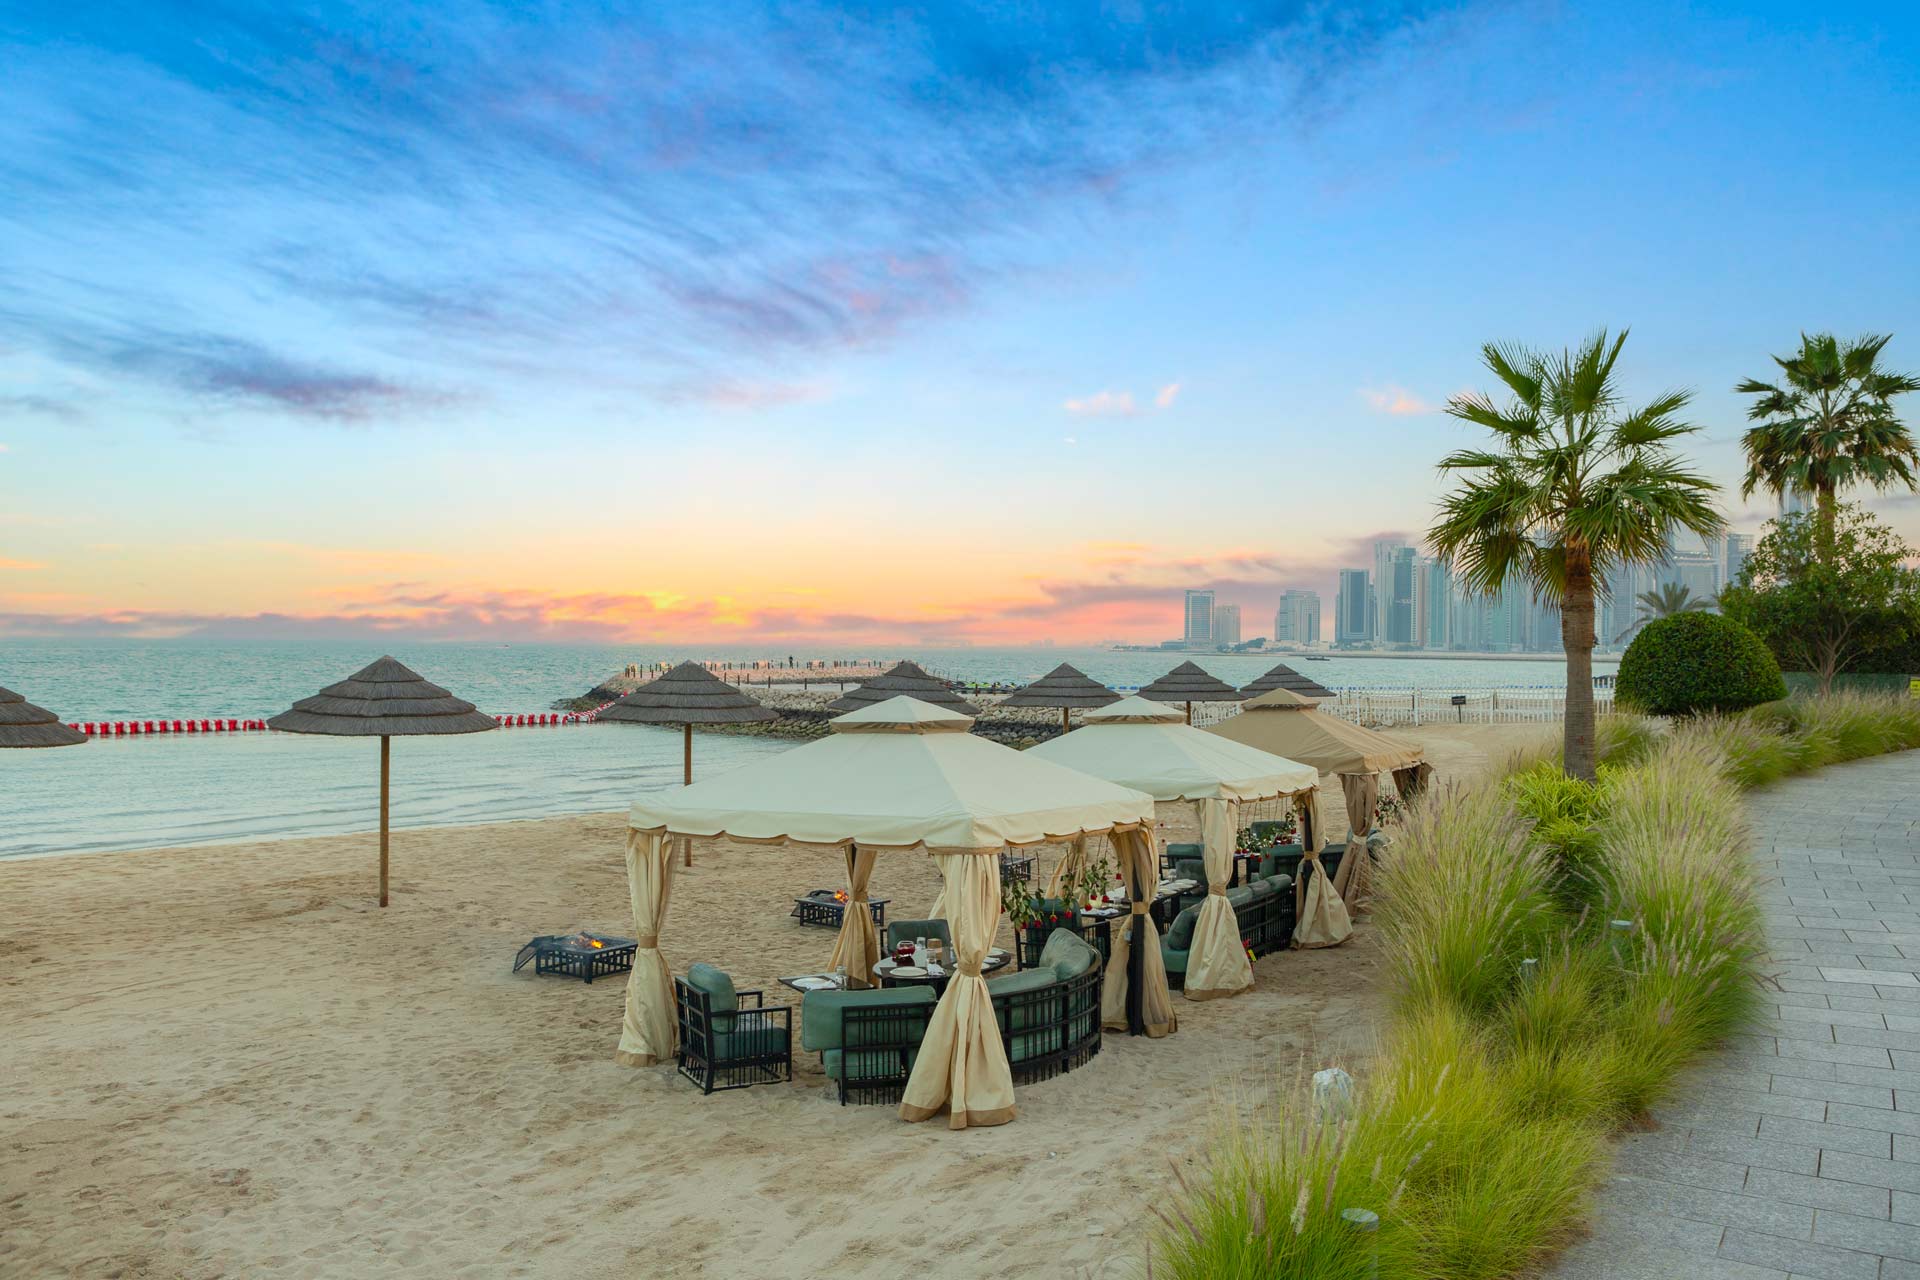 St. Regis Doha Launches a New Outdoor Private Dining Experience